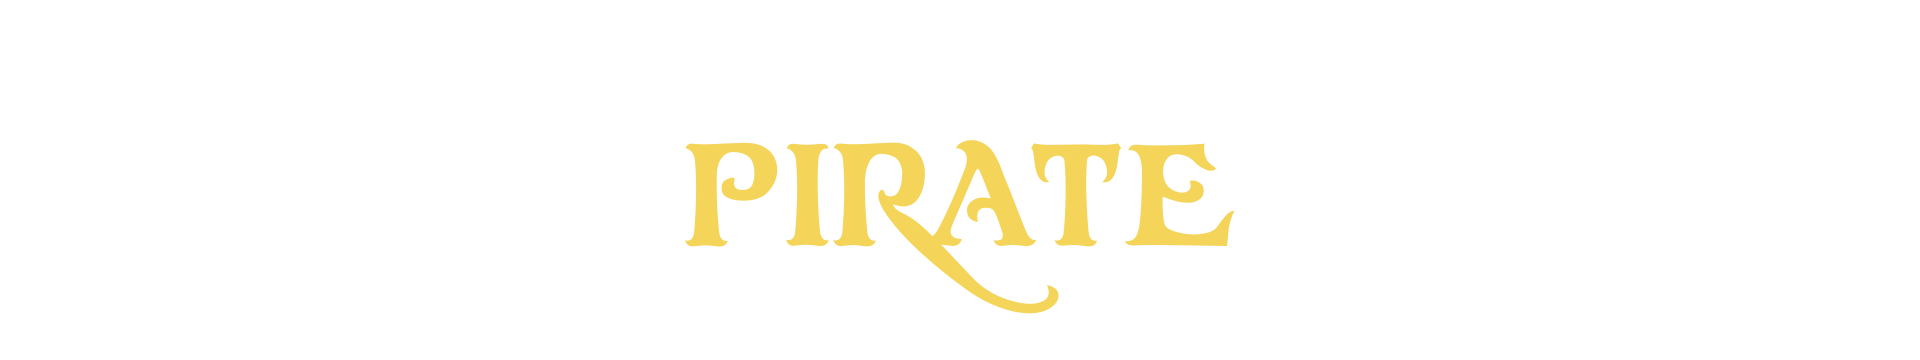 Pirates Low Poly Pack